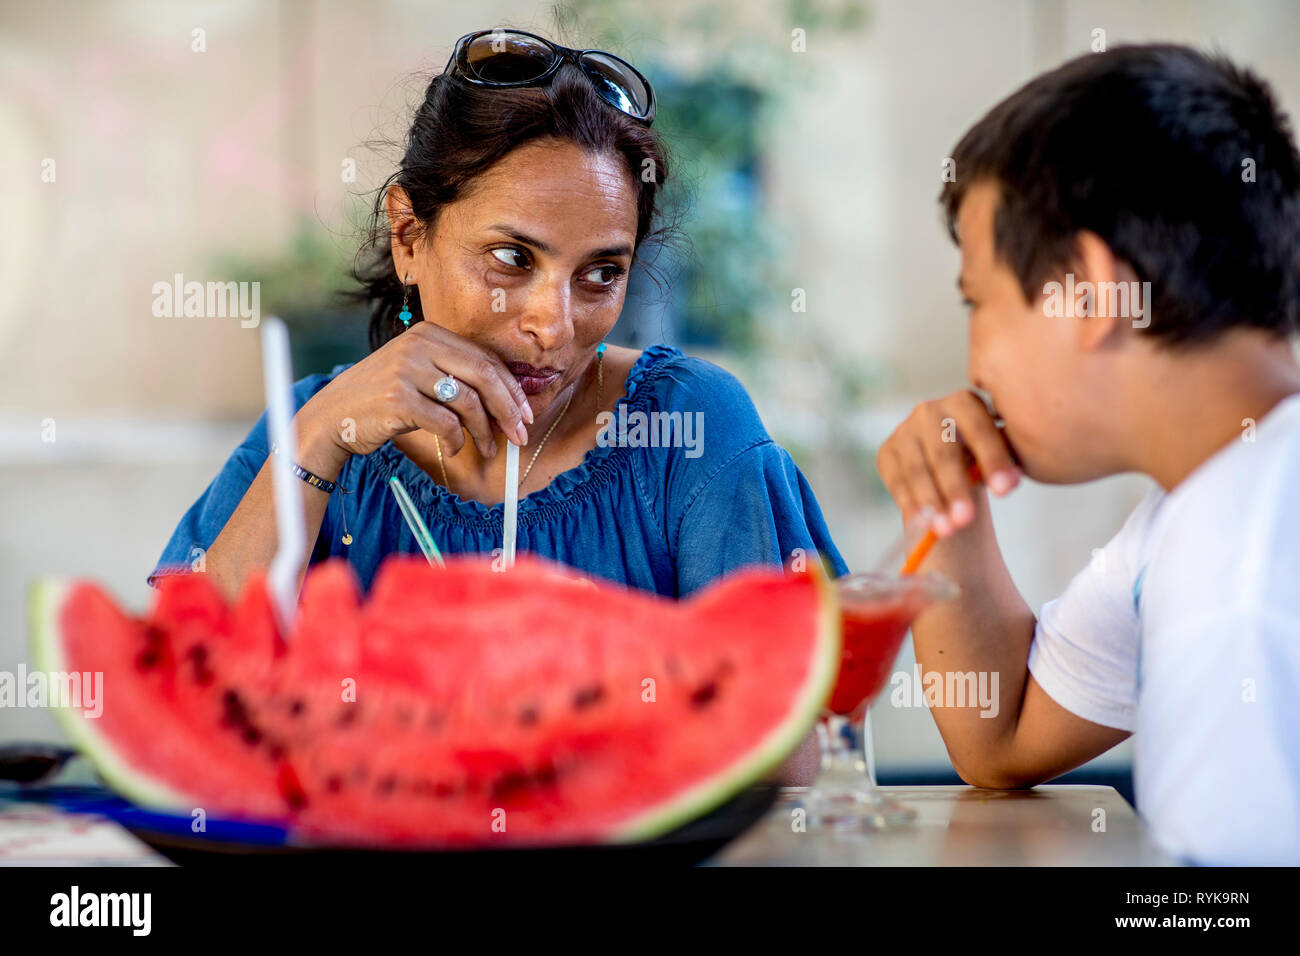 Mother and son drinking watermelon juice in Palermo, Sicily (Italy). Stock Photo